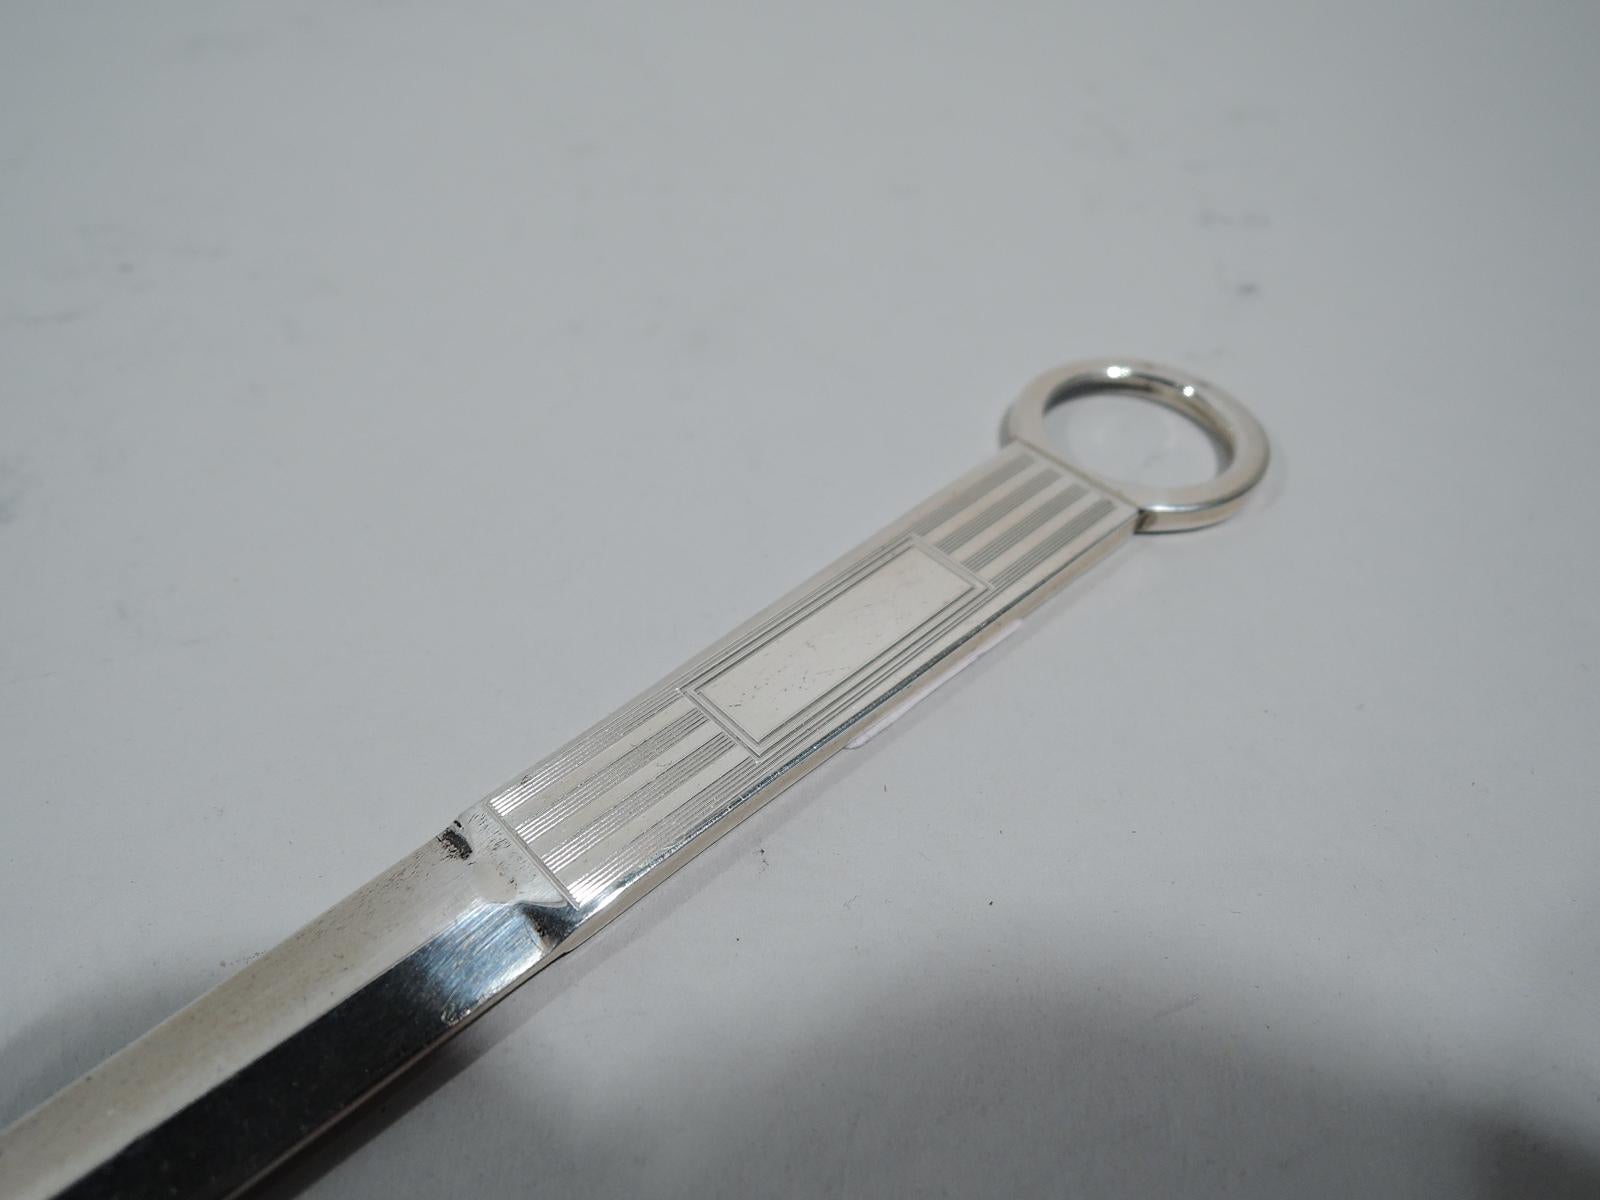 Art Deco sterling silver letter opener. Made by Thomae in Attleboro, Mass., ca 1930. Faceted tapering blade mounted to rectilinear handle with engine-turned lines and rectangular frame (vacant); finger ring terminal. A stylish desk accessory from